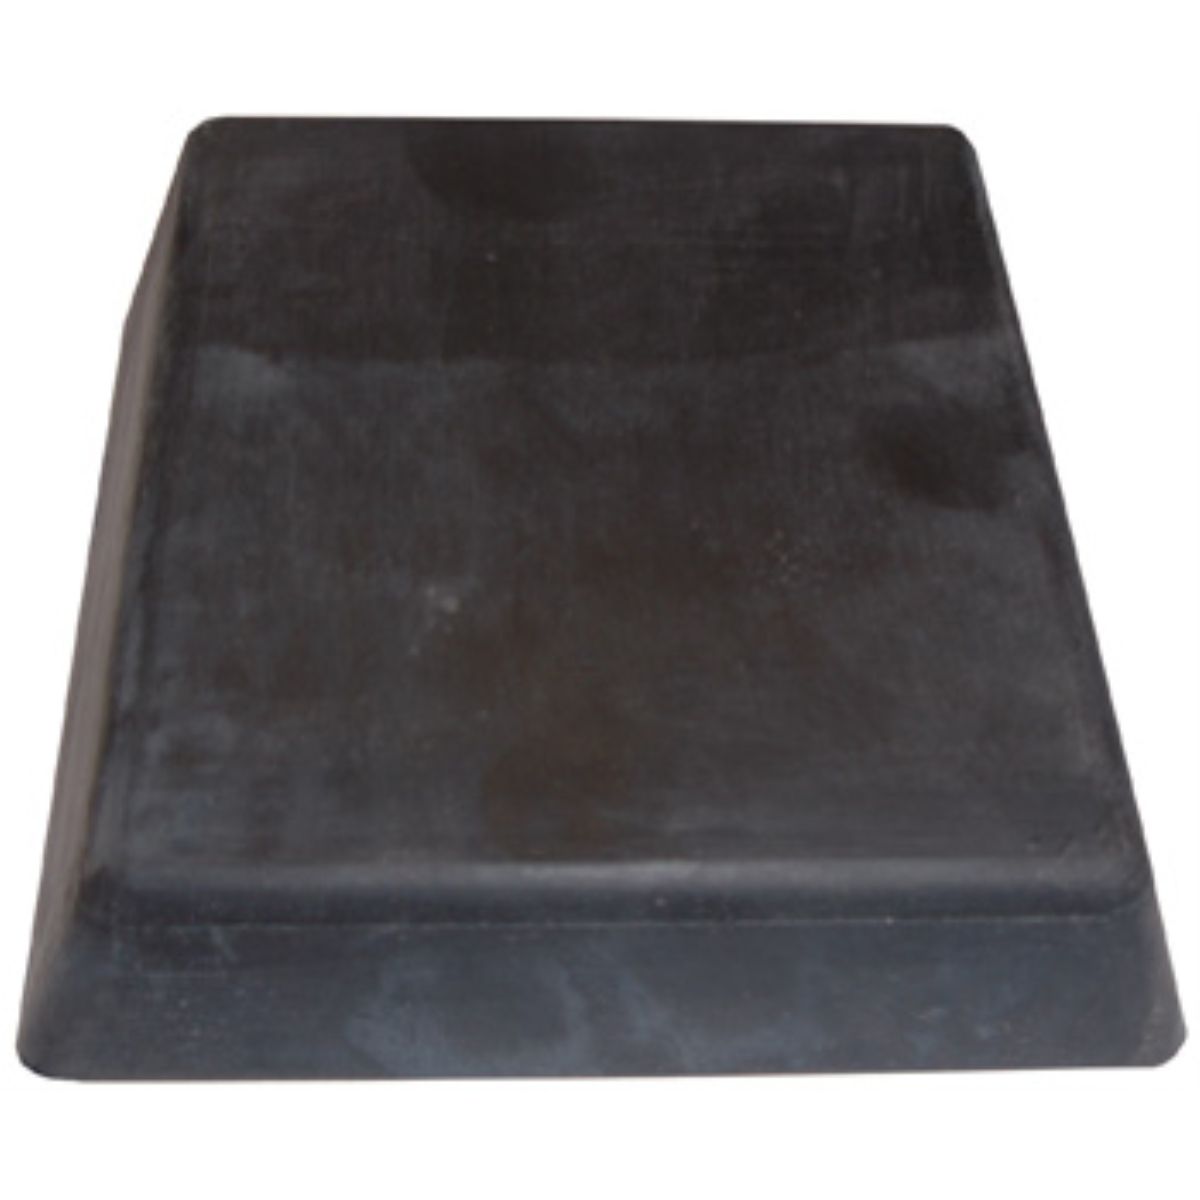 Center Rubber Pad For Coats Tire Changers